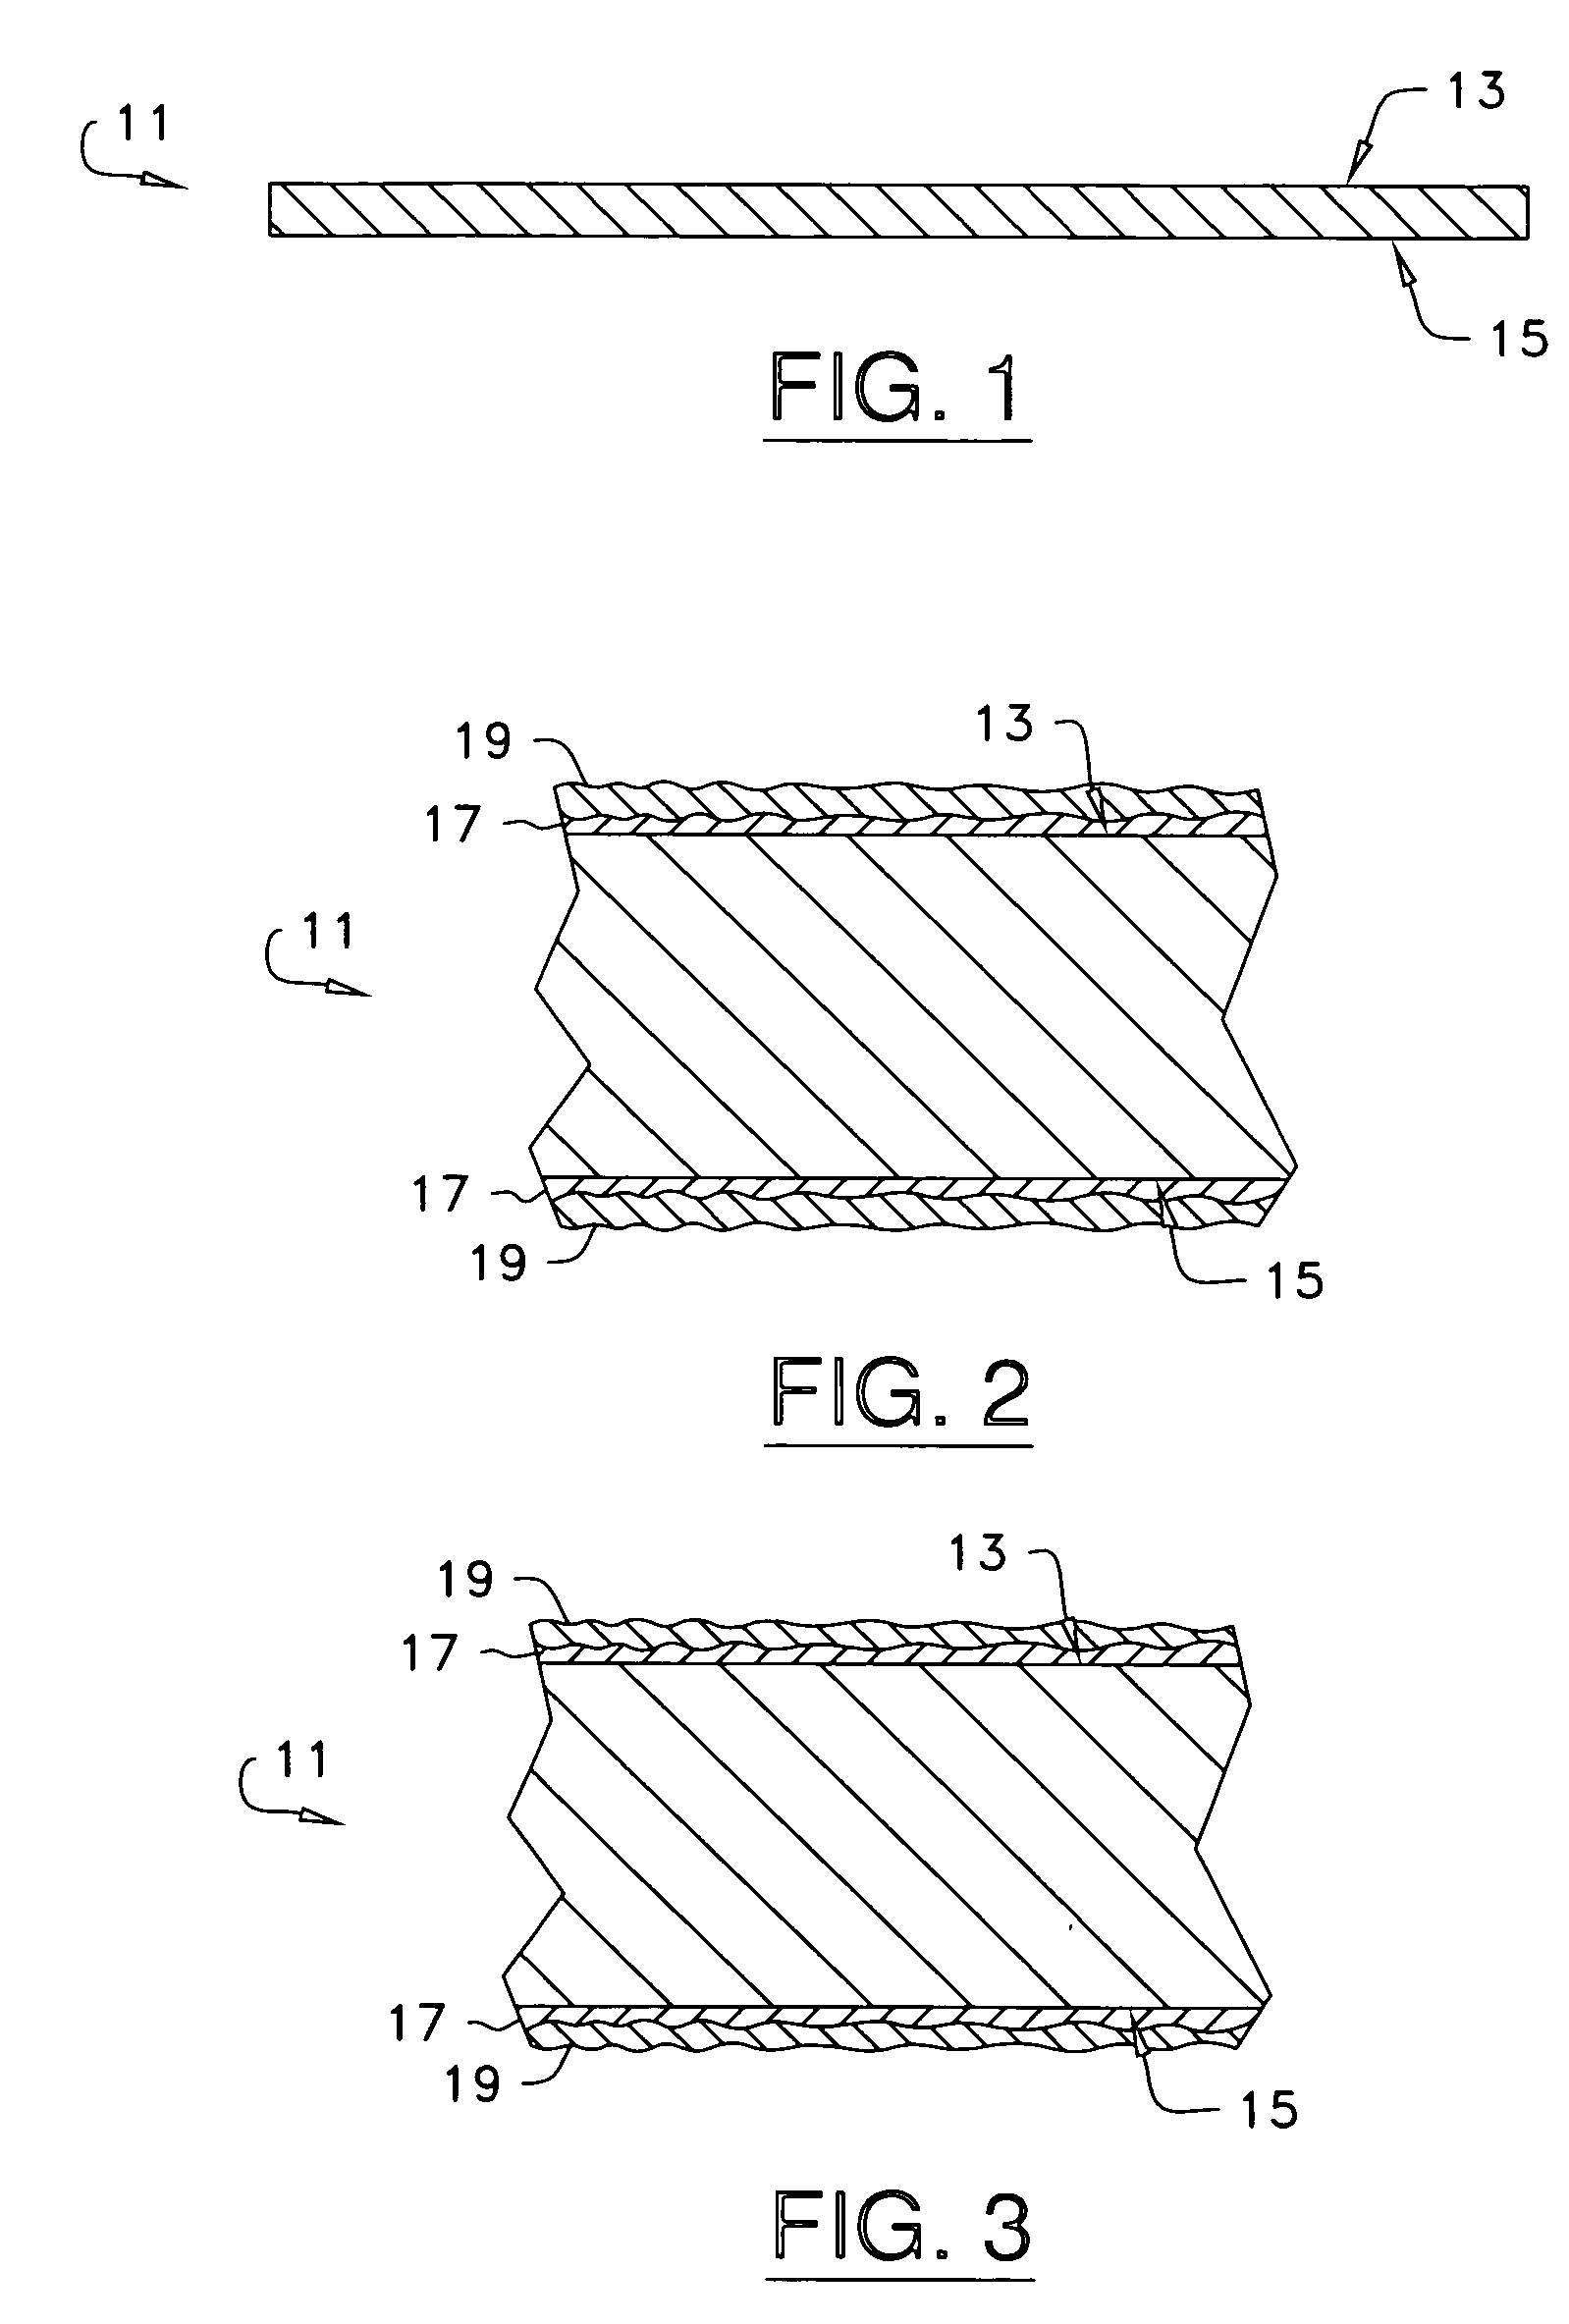 Method of treating conductive layer for use in a circuitized substrate and method of making said substrate having said conductive layer as part thereof